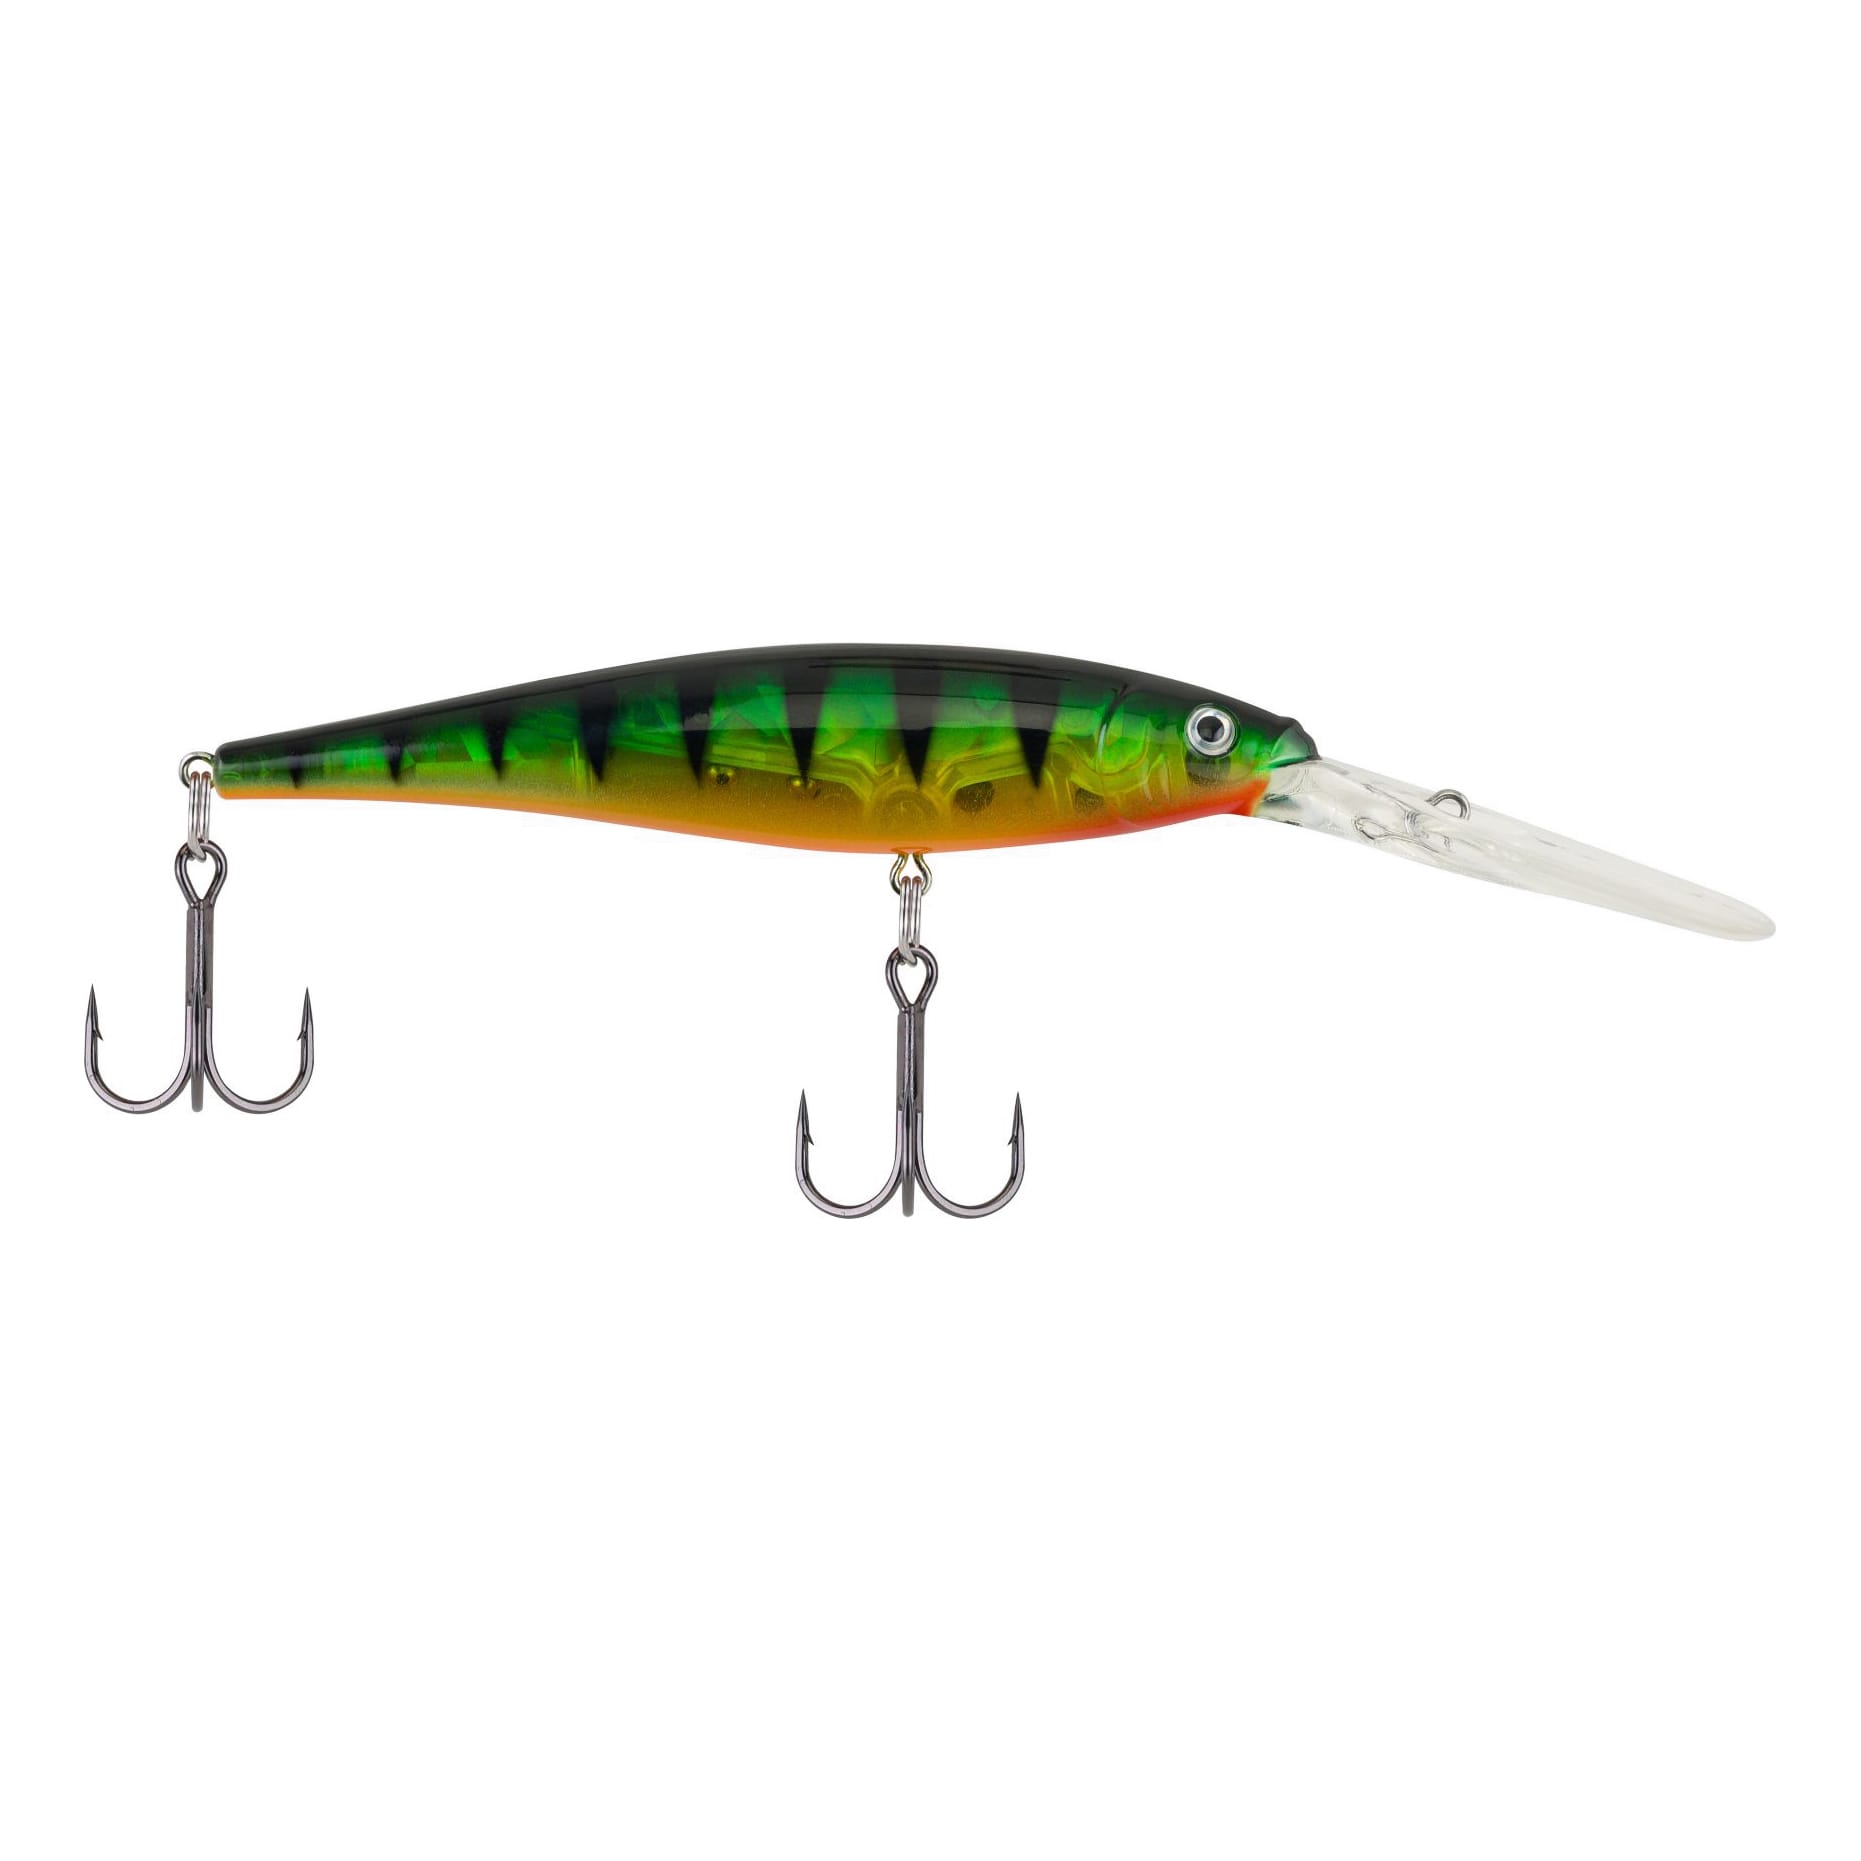 Fishing lure great multi-color thin fin Hot-n-tot , in the package, super  bait.